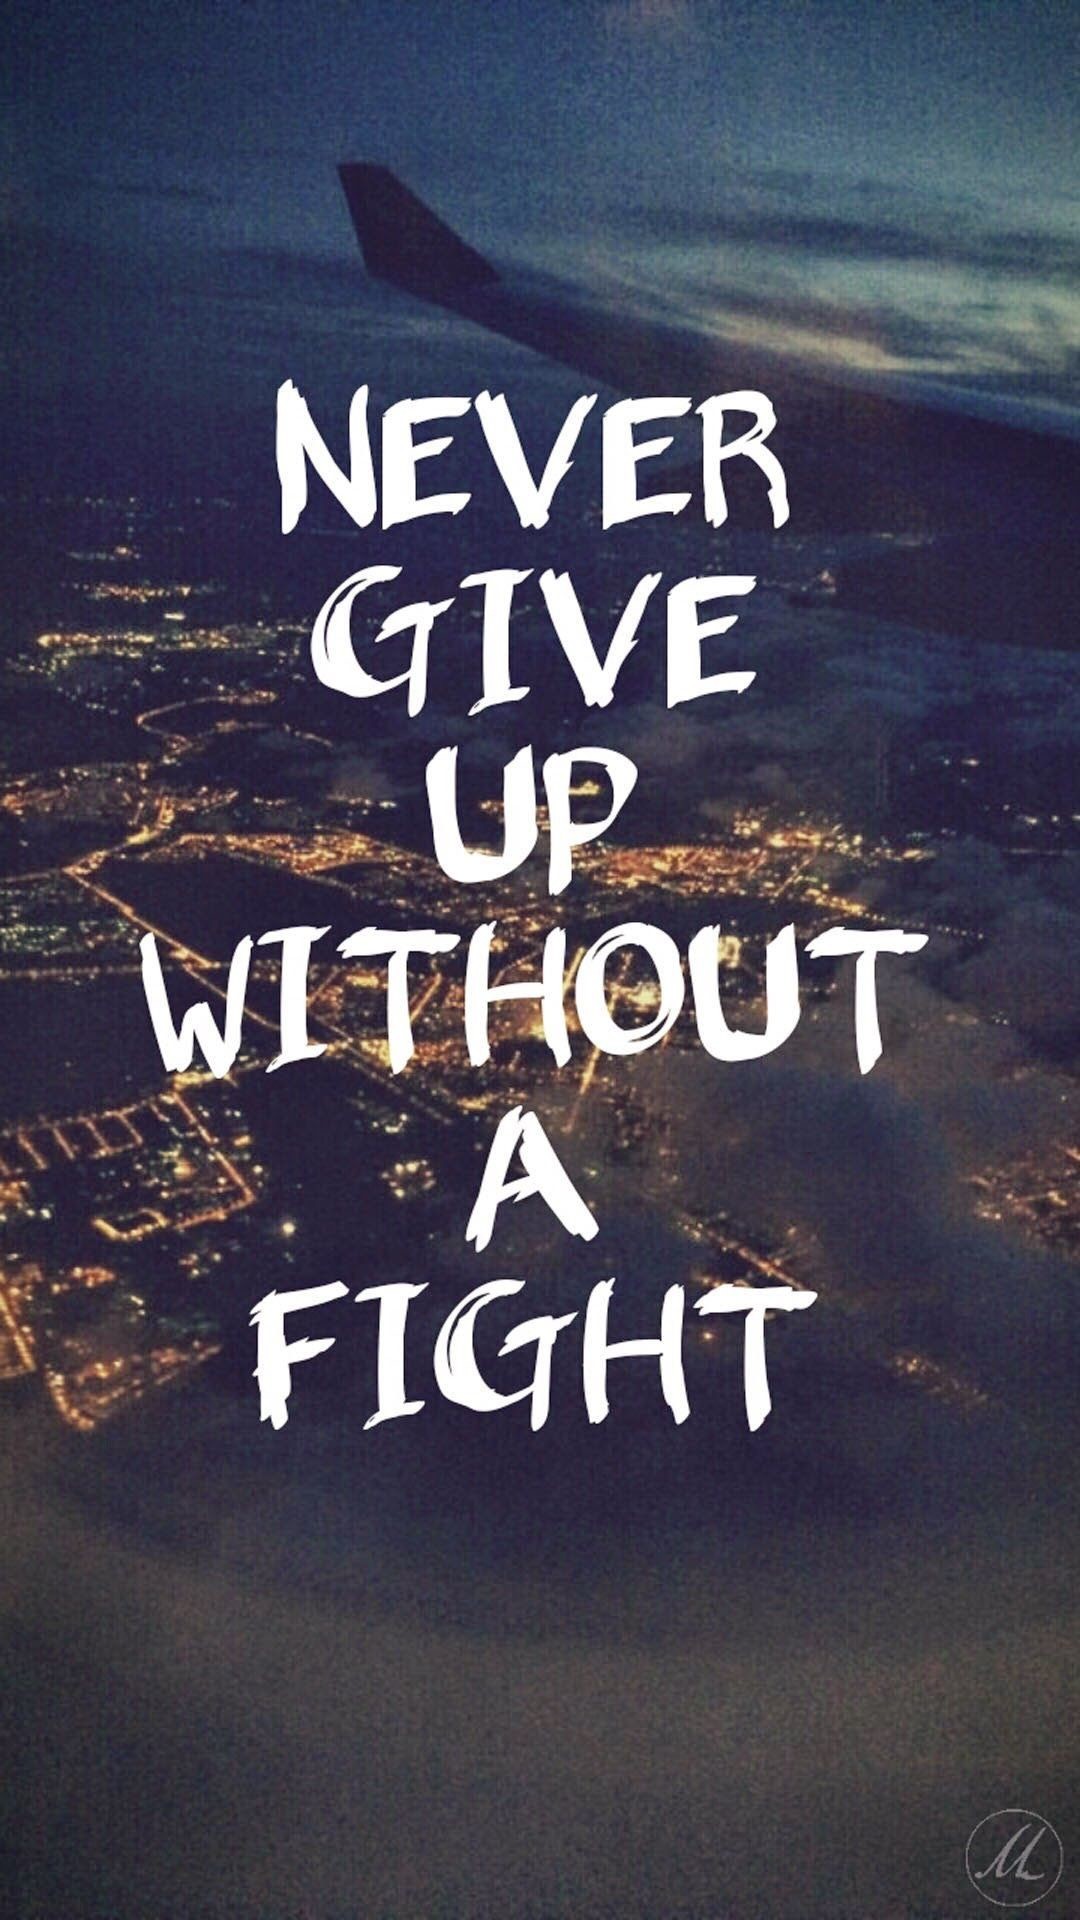 1080x1920 Motivational Quotes Wallpaper Iphone 5 With 80 Wallpapers On WallpaperPlay 1